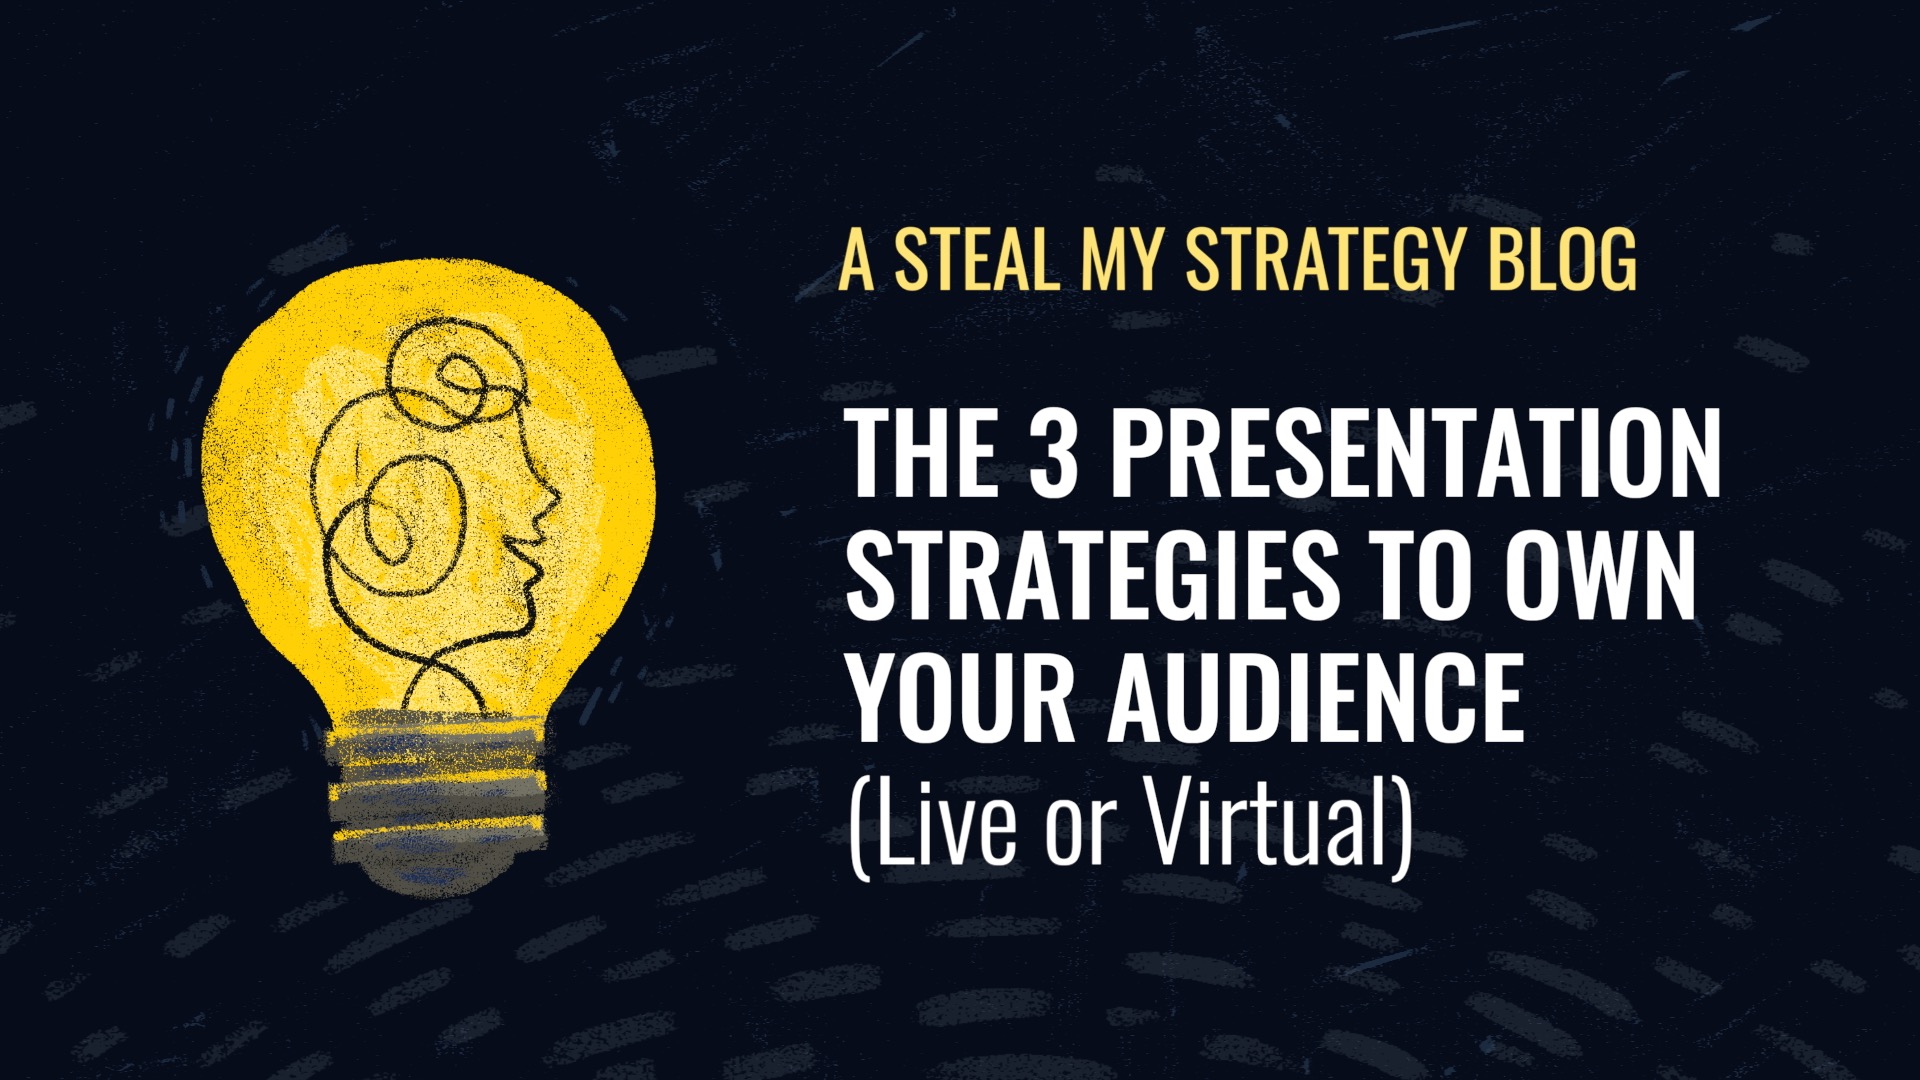 The 3 Presentation Strategies to Own Your Audience (Live or Virtual)